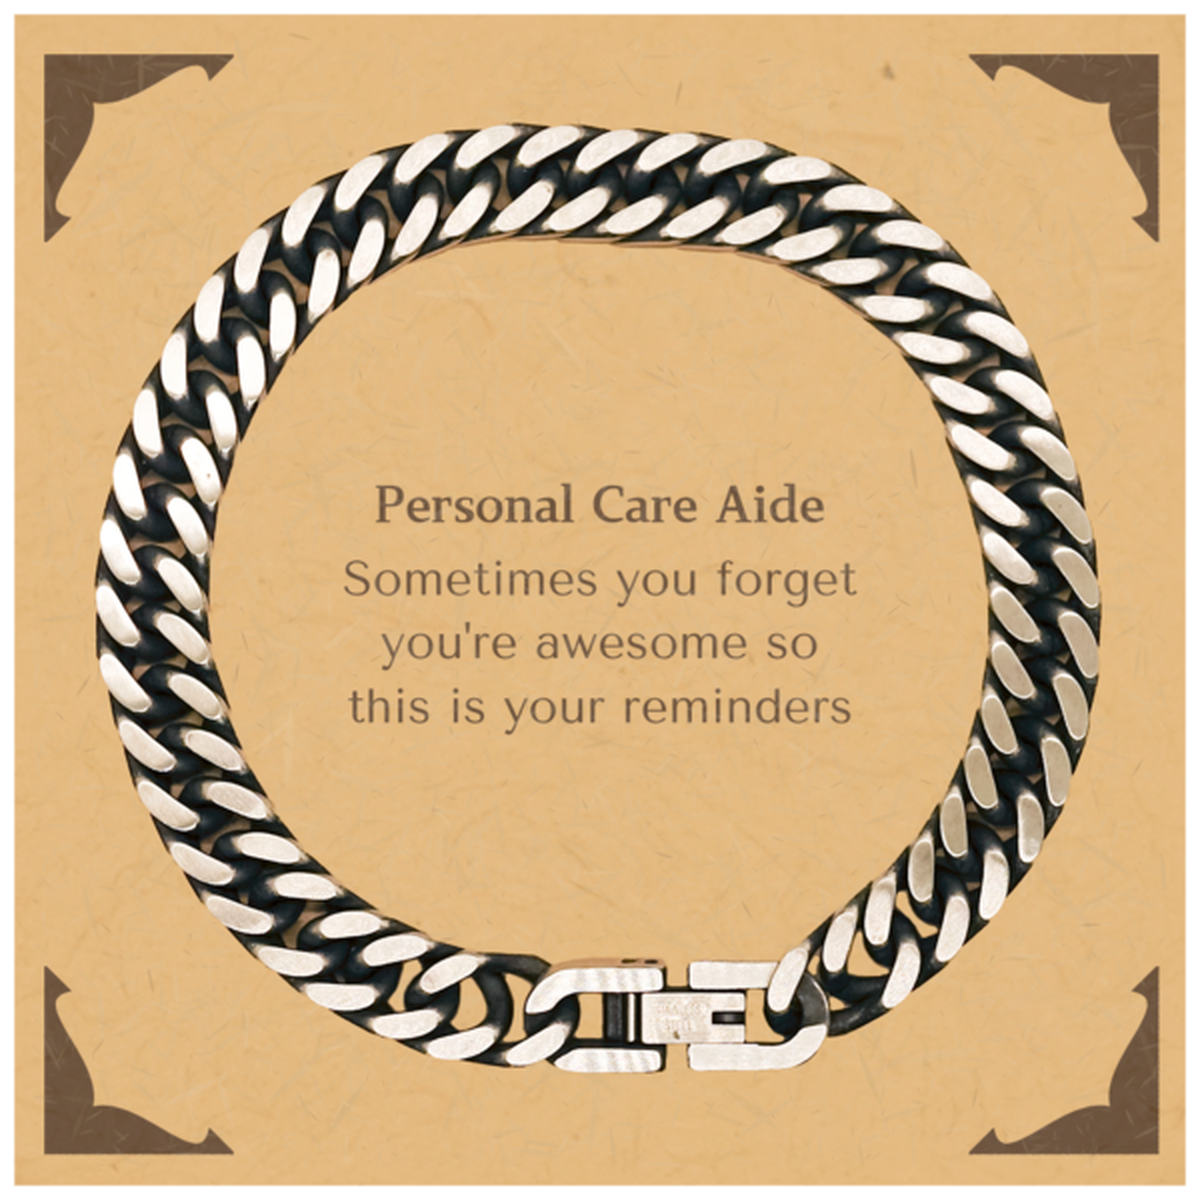 Sentimental Personal Care Aide Cuban Link Chain Bracelet, Personal Care Aide Sometimes you forget you're awesome so this is your reminders, Graduation Christmas Birthday Gifts for Personal Care Aide, Men, Women, Coworkers